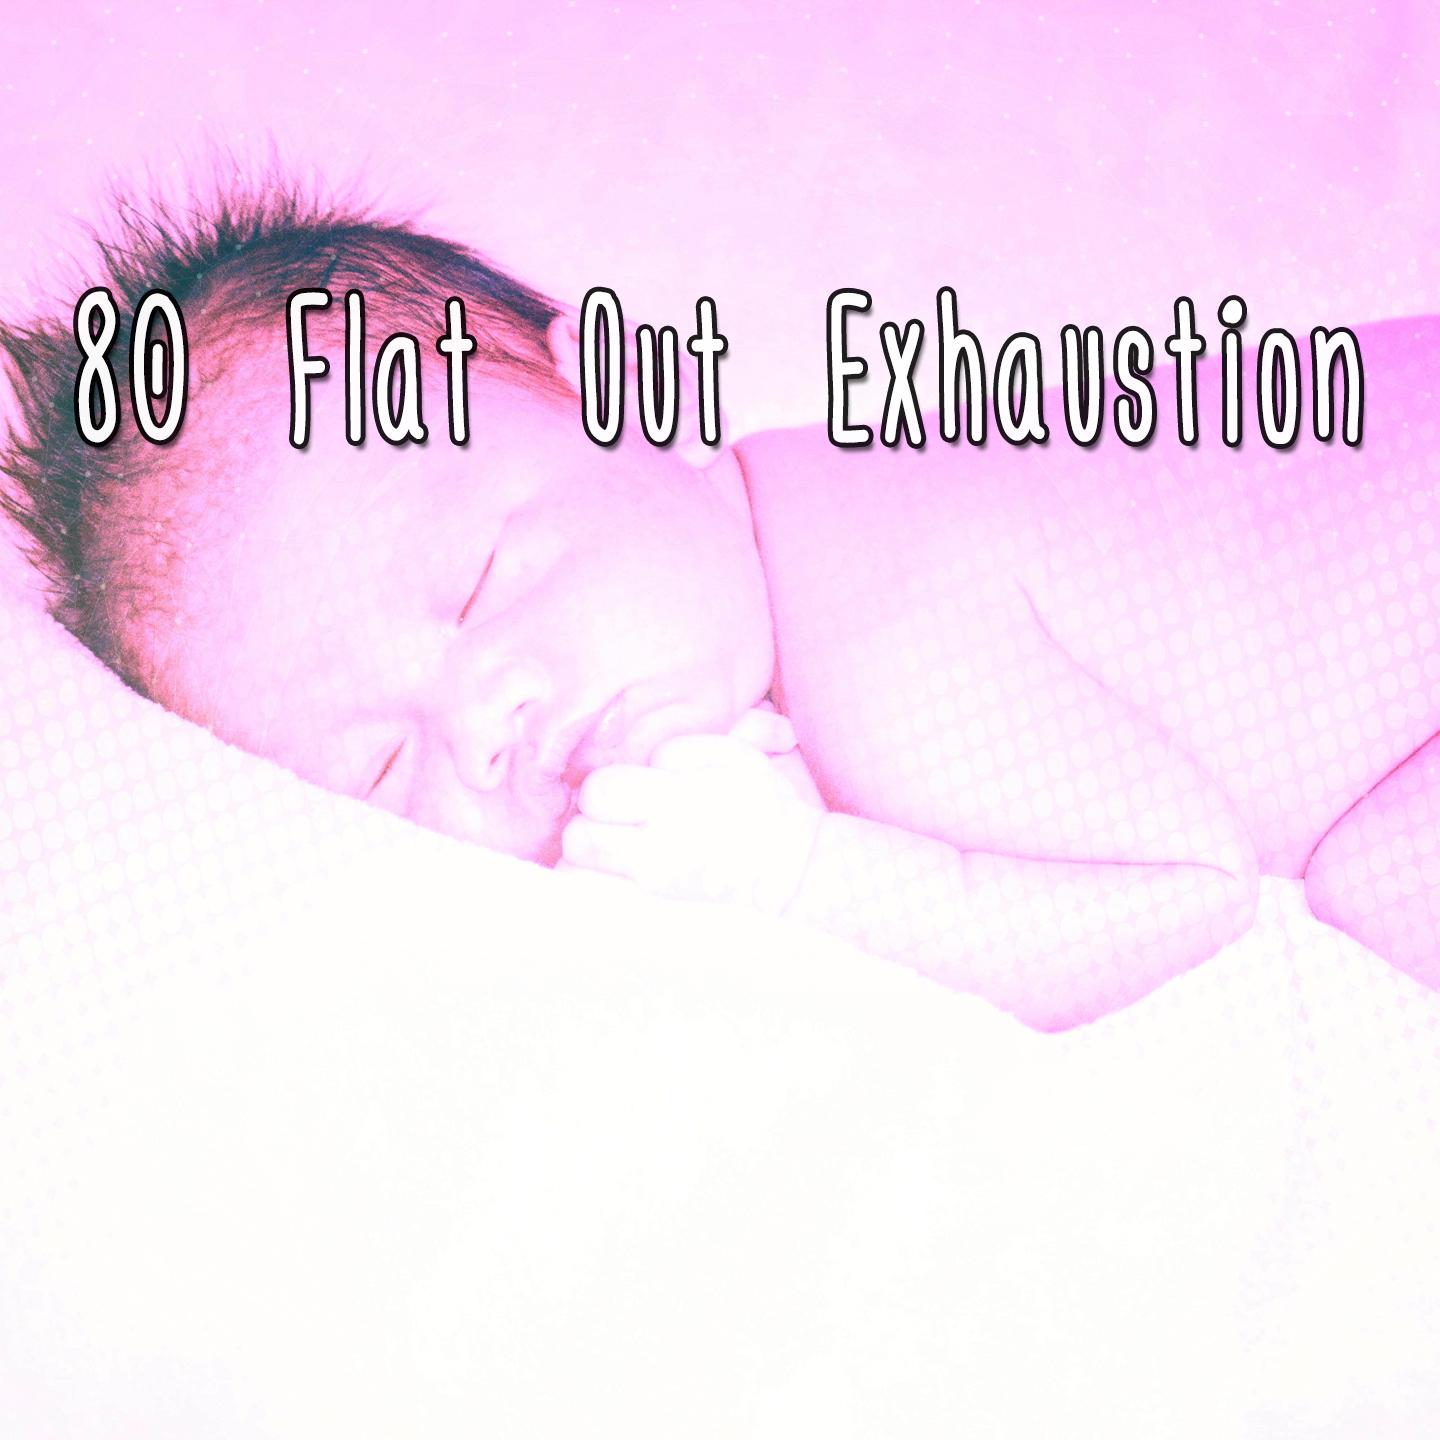 80 Flat Out Exhaustion